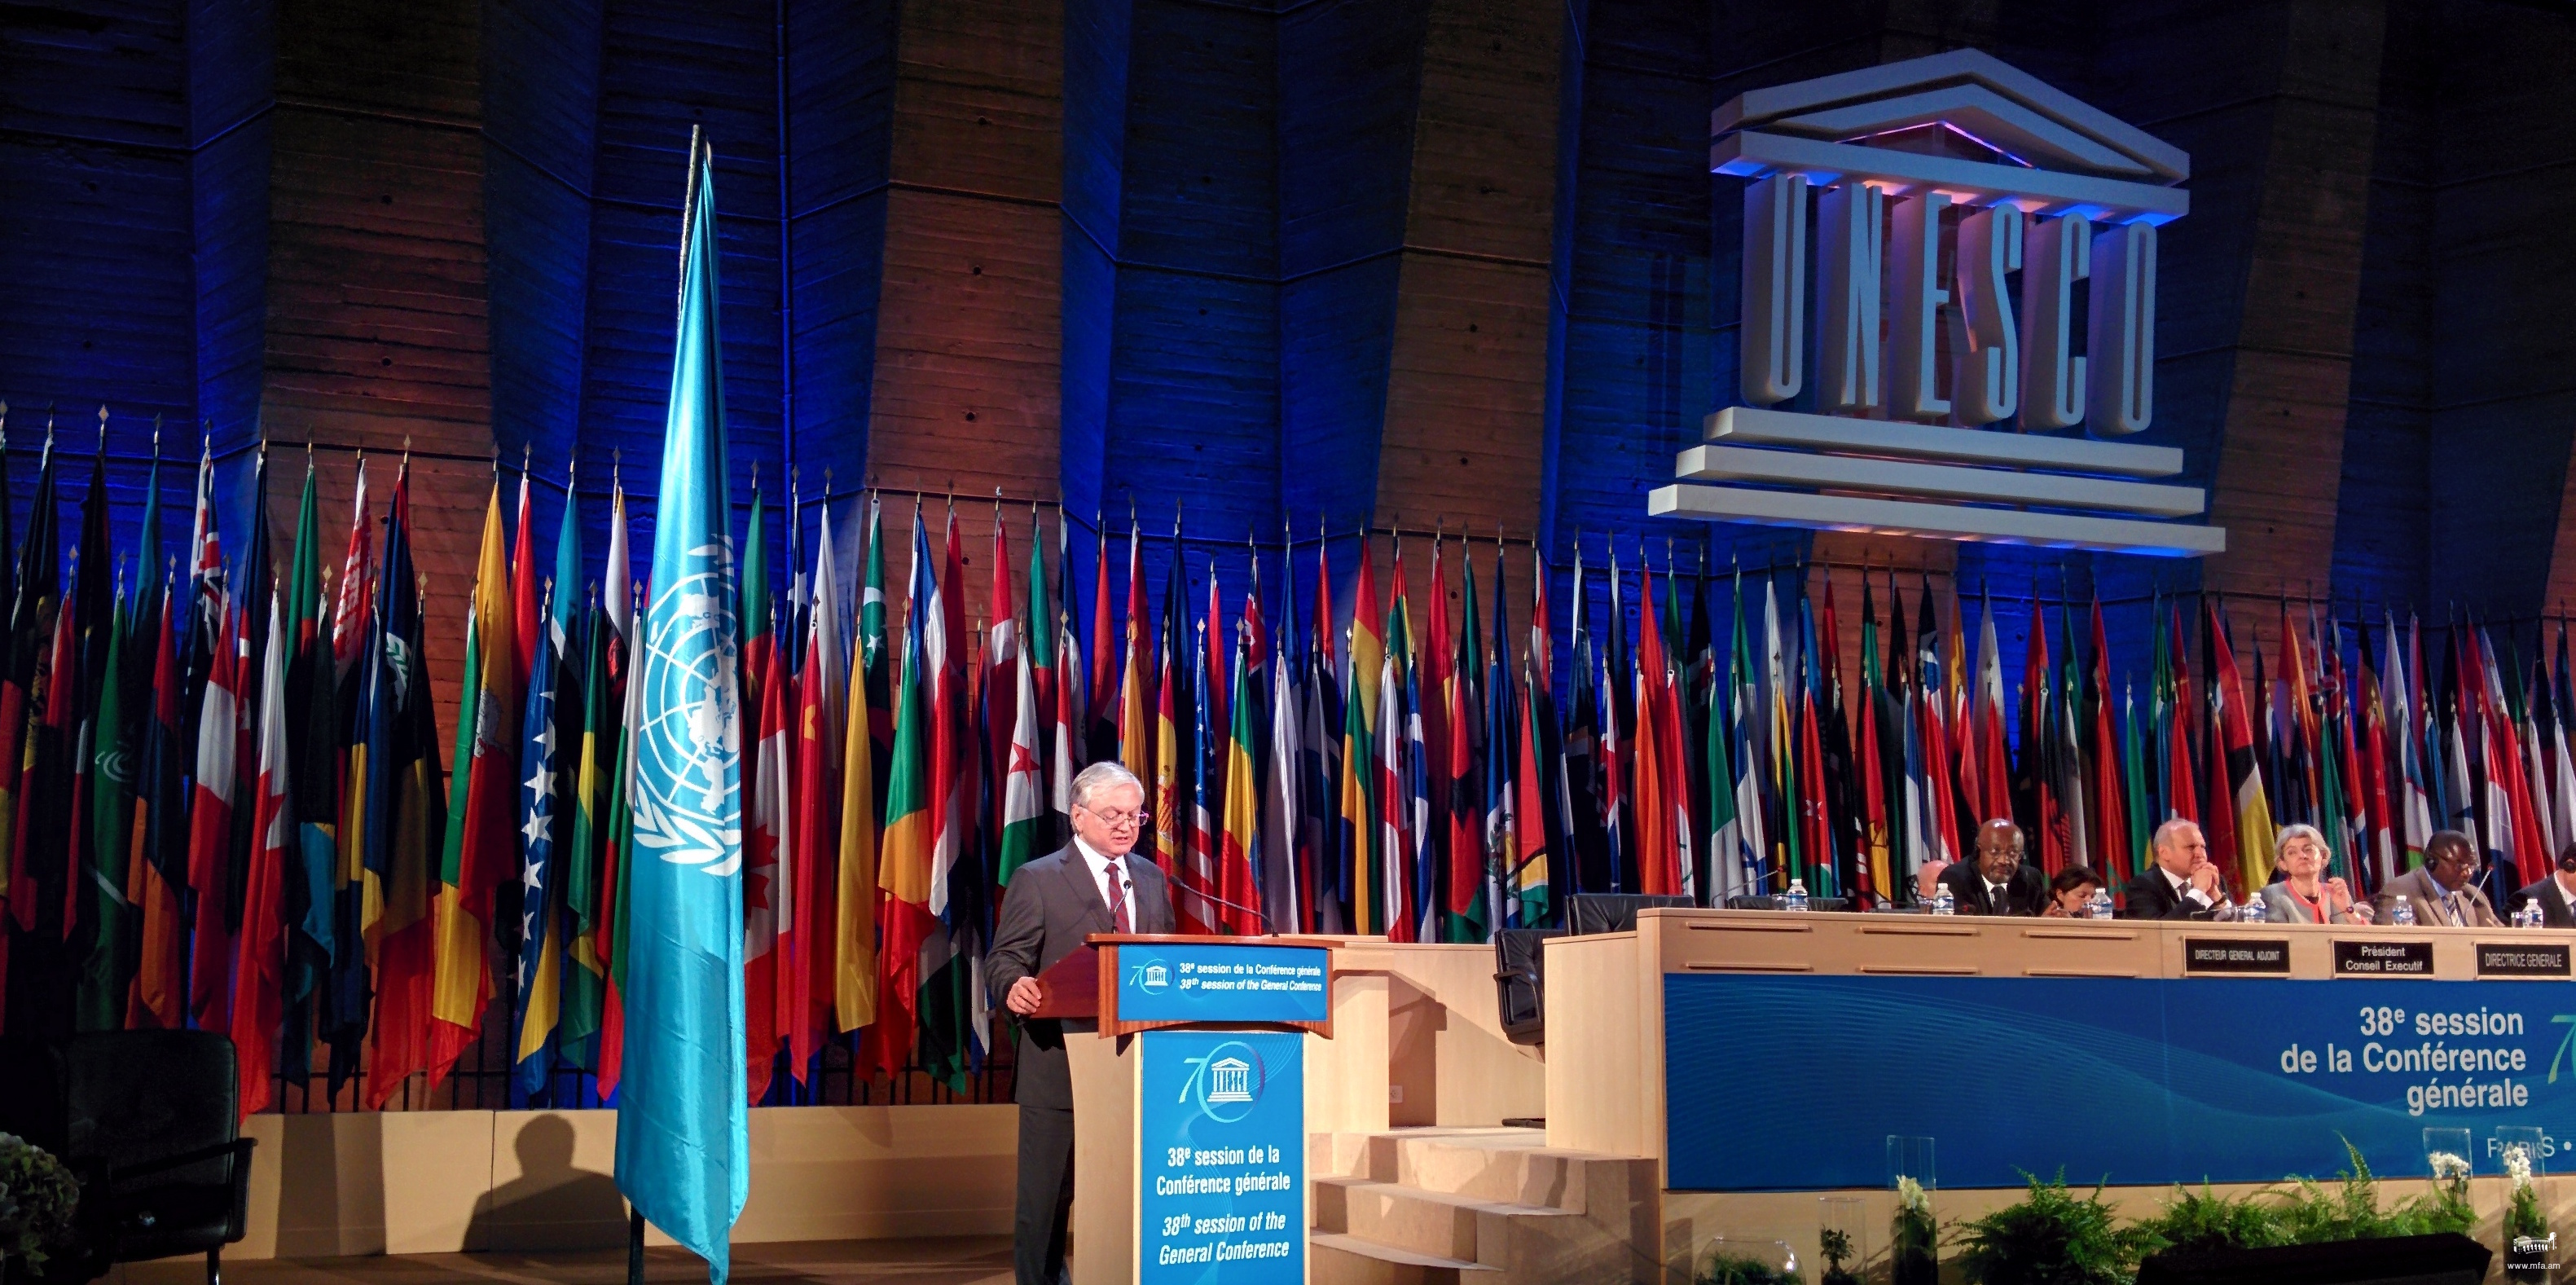 Statement by Edward Nalbandian, Minister of Foreign Affairs of the Republic of Armenia, at the 38th session of UNESCO General Conference